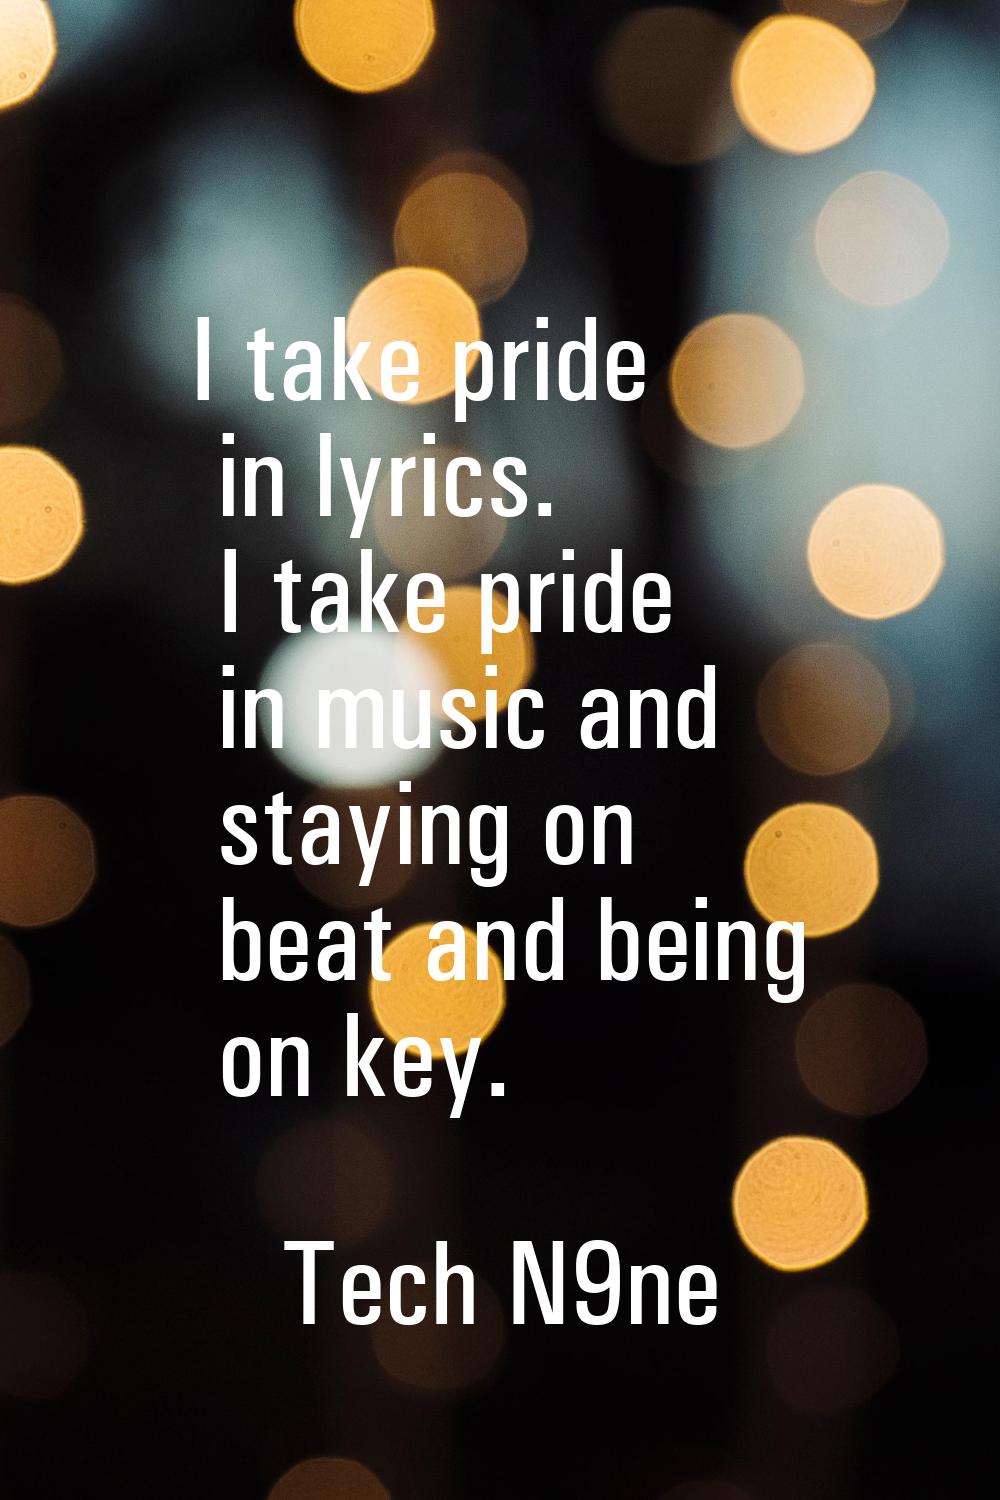 I take pride in lyrics. I take pride in music and staying on beat and being on key.